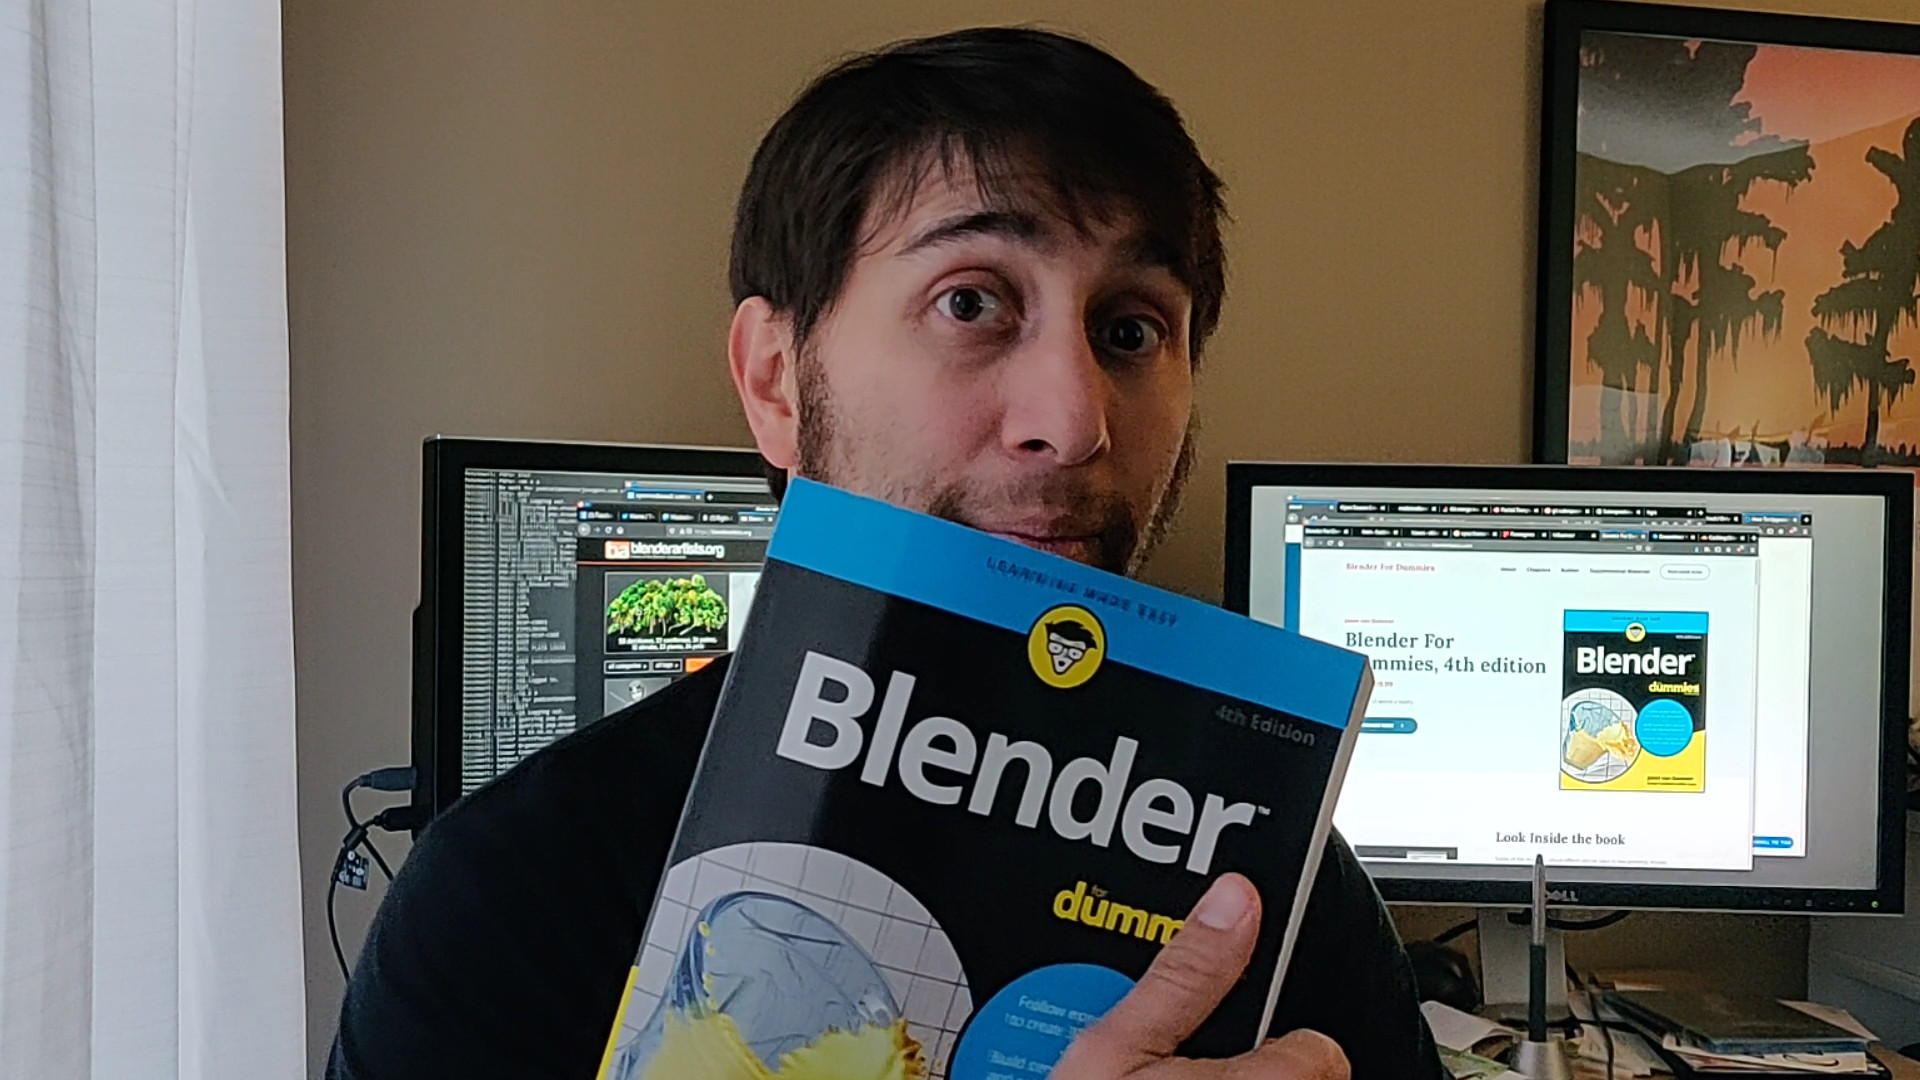 Blender For Dummies, 4th edition: It’s out!